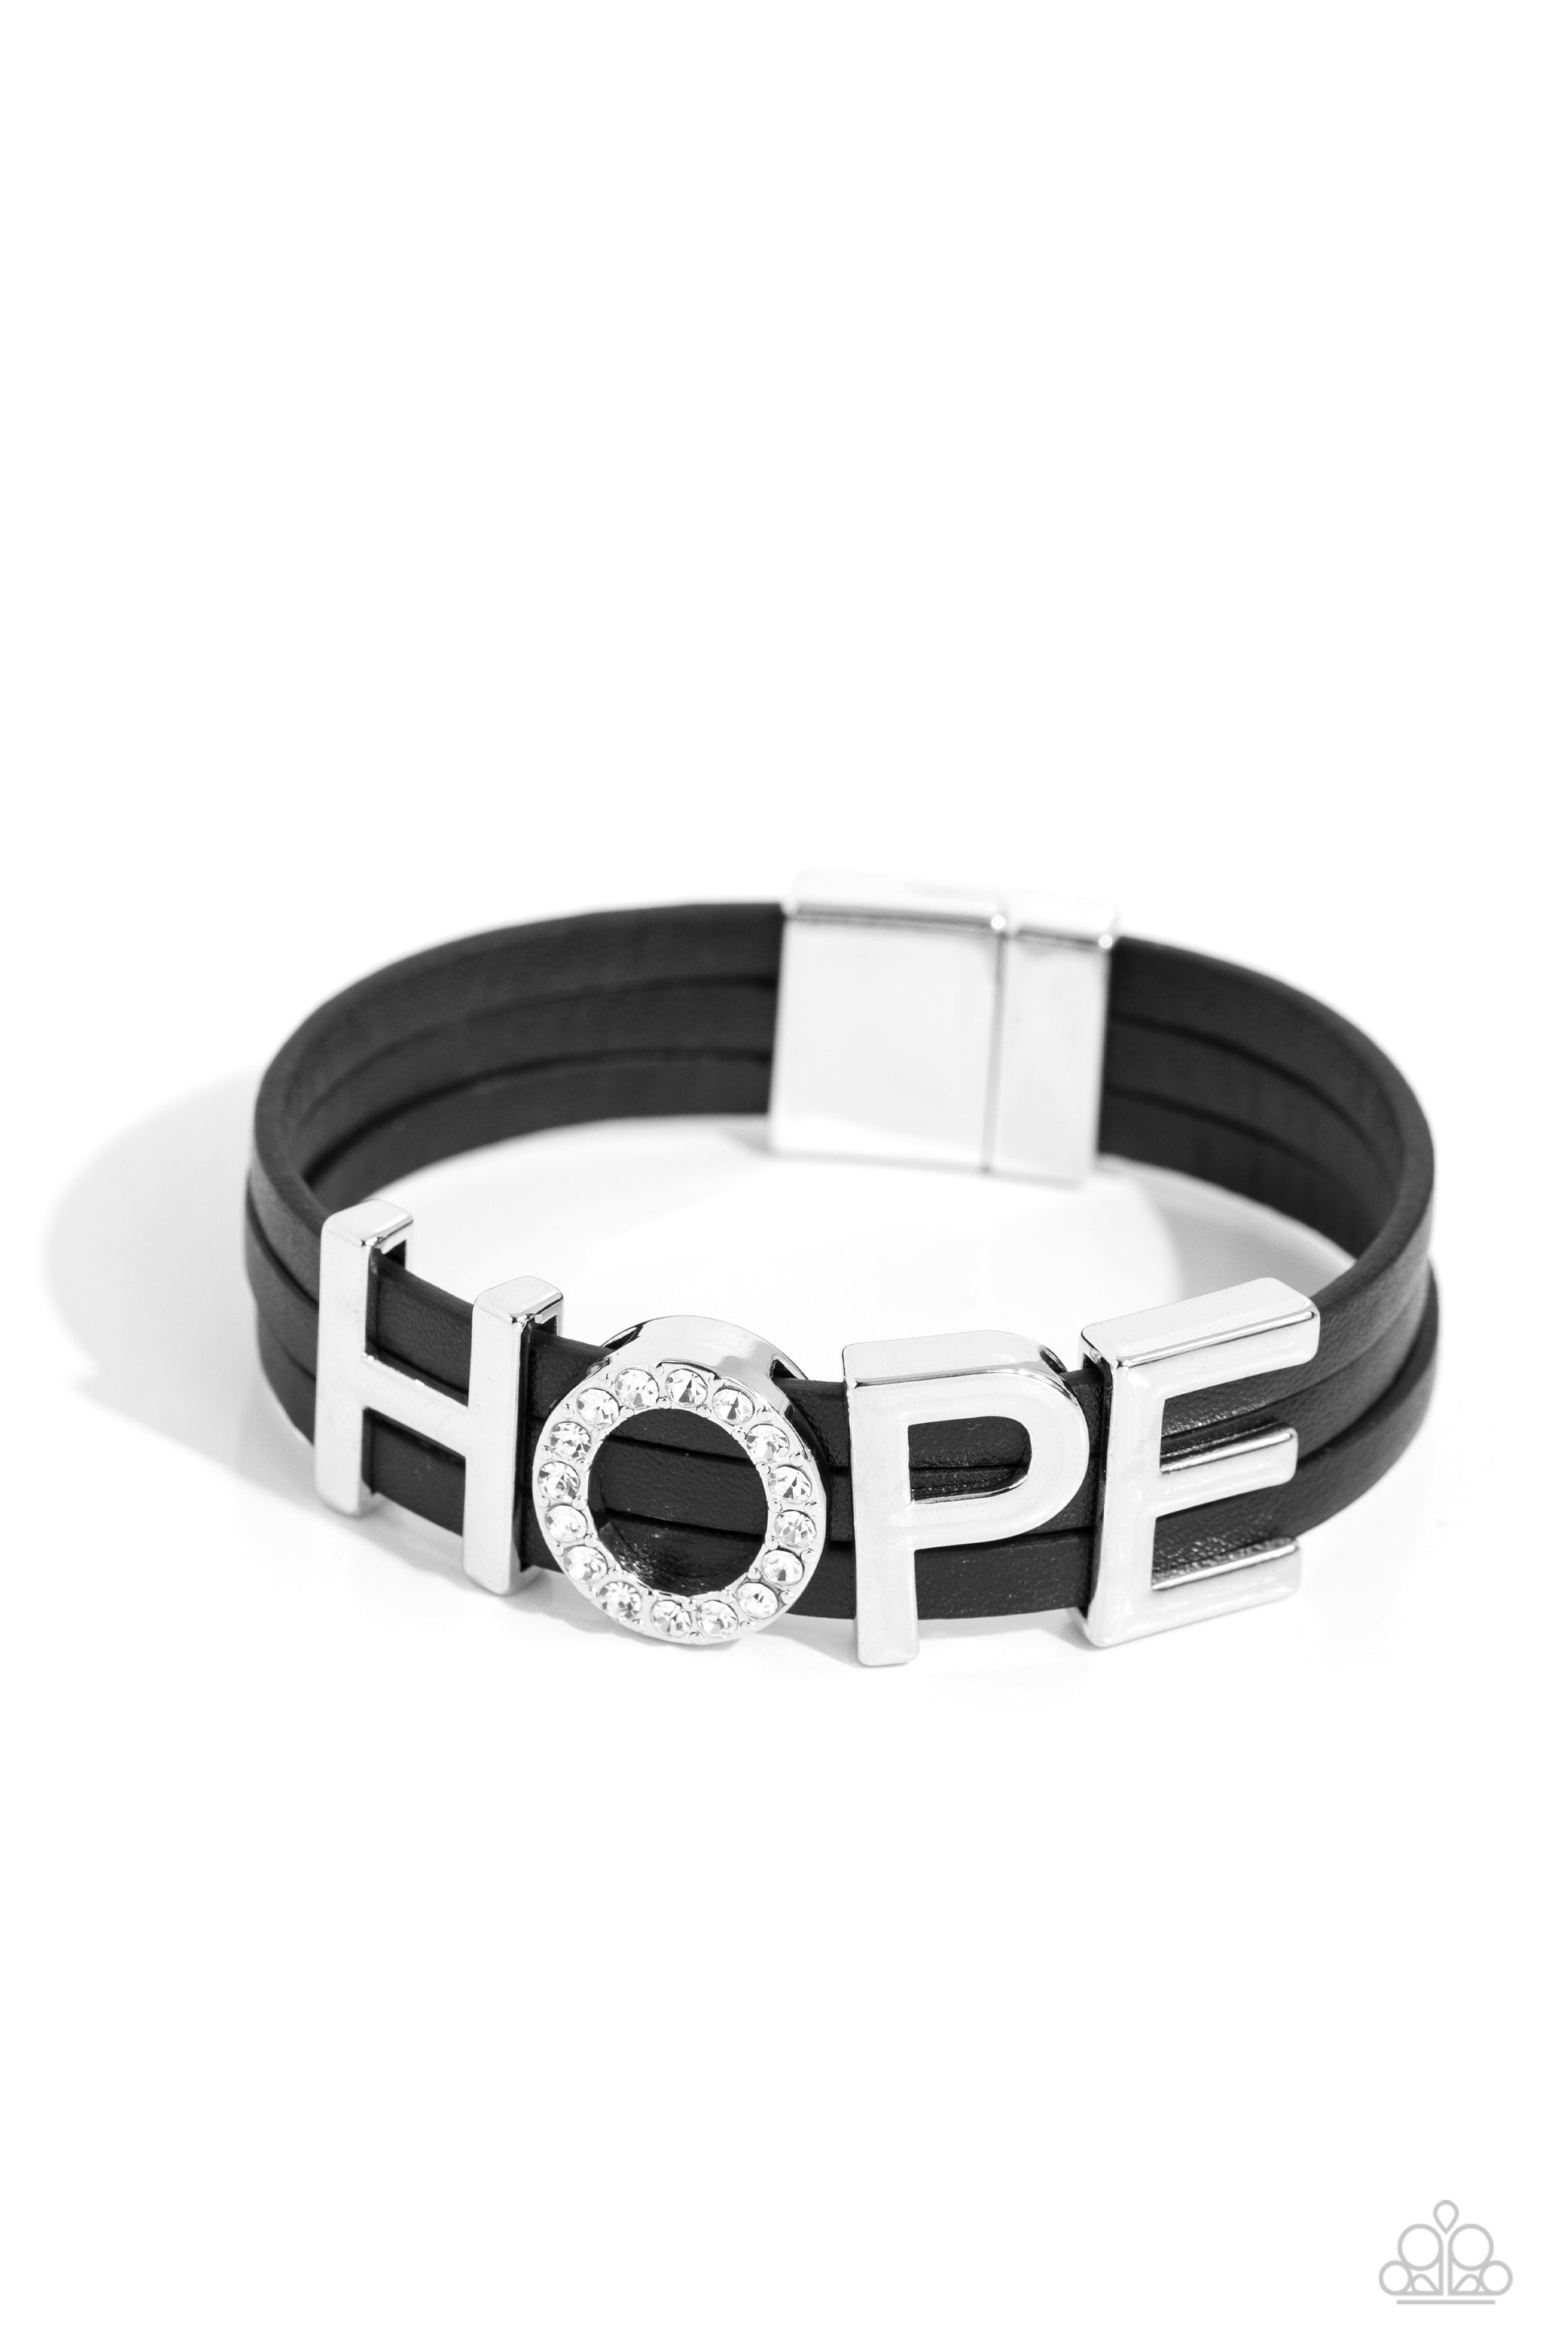 Paparazzi Accessories - Hopeful Haute - Black Bracelets threaded along layers of black leather strands, glistening silver letters form the word "HOPE" with the "O" embossed in white rhinestones for a dazzling statement. Features a magnetic closure.  Sold as one individual bracelet.